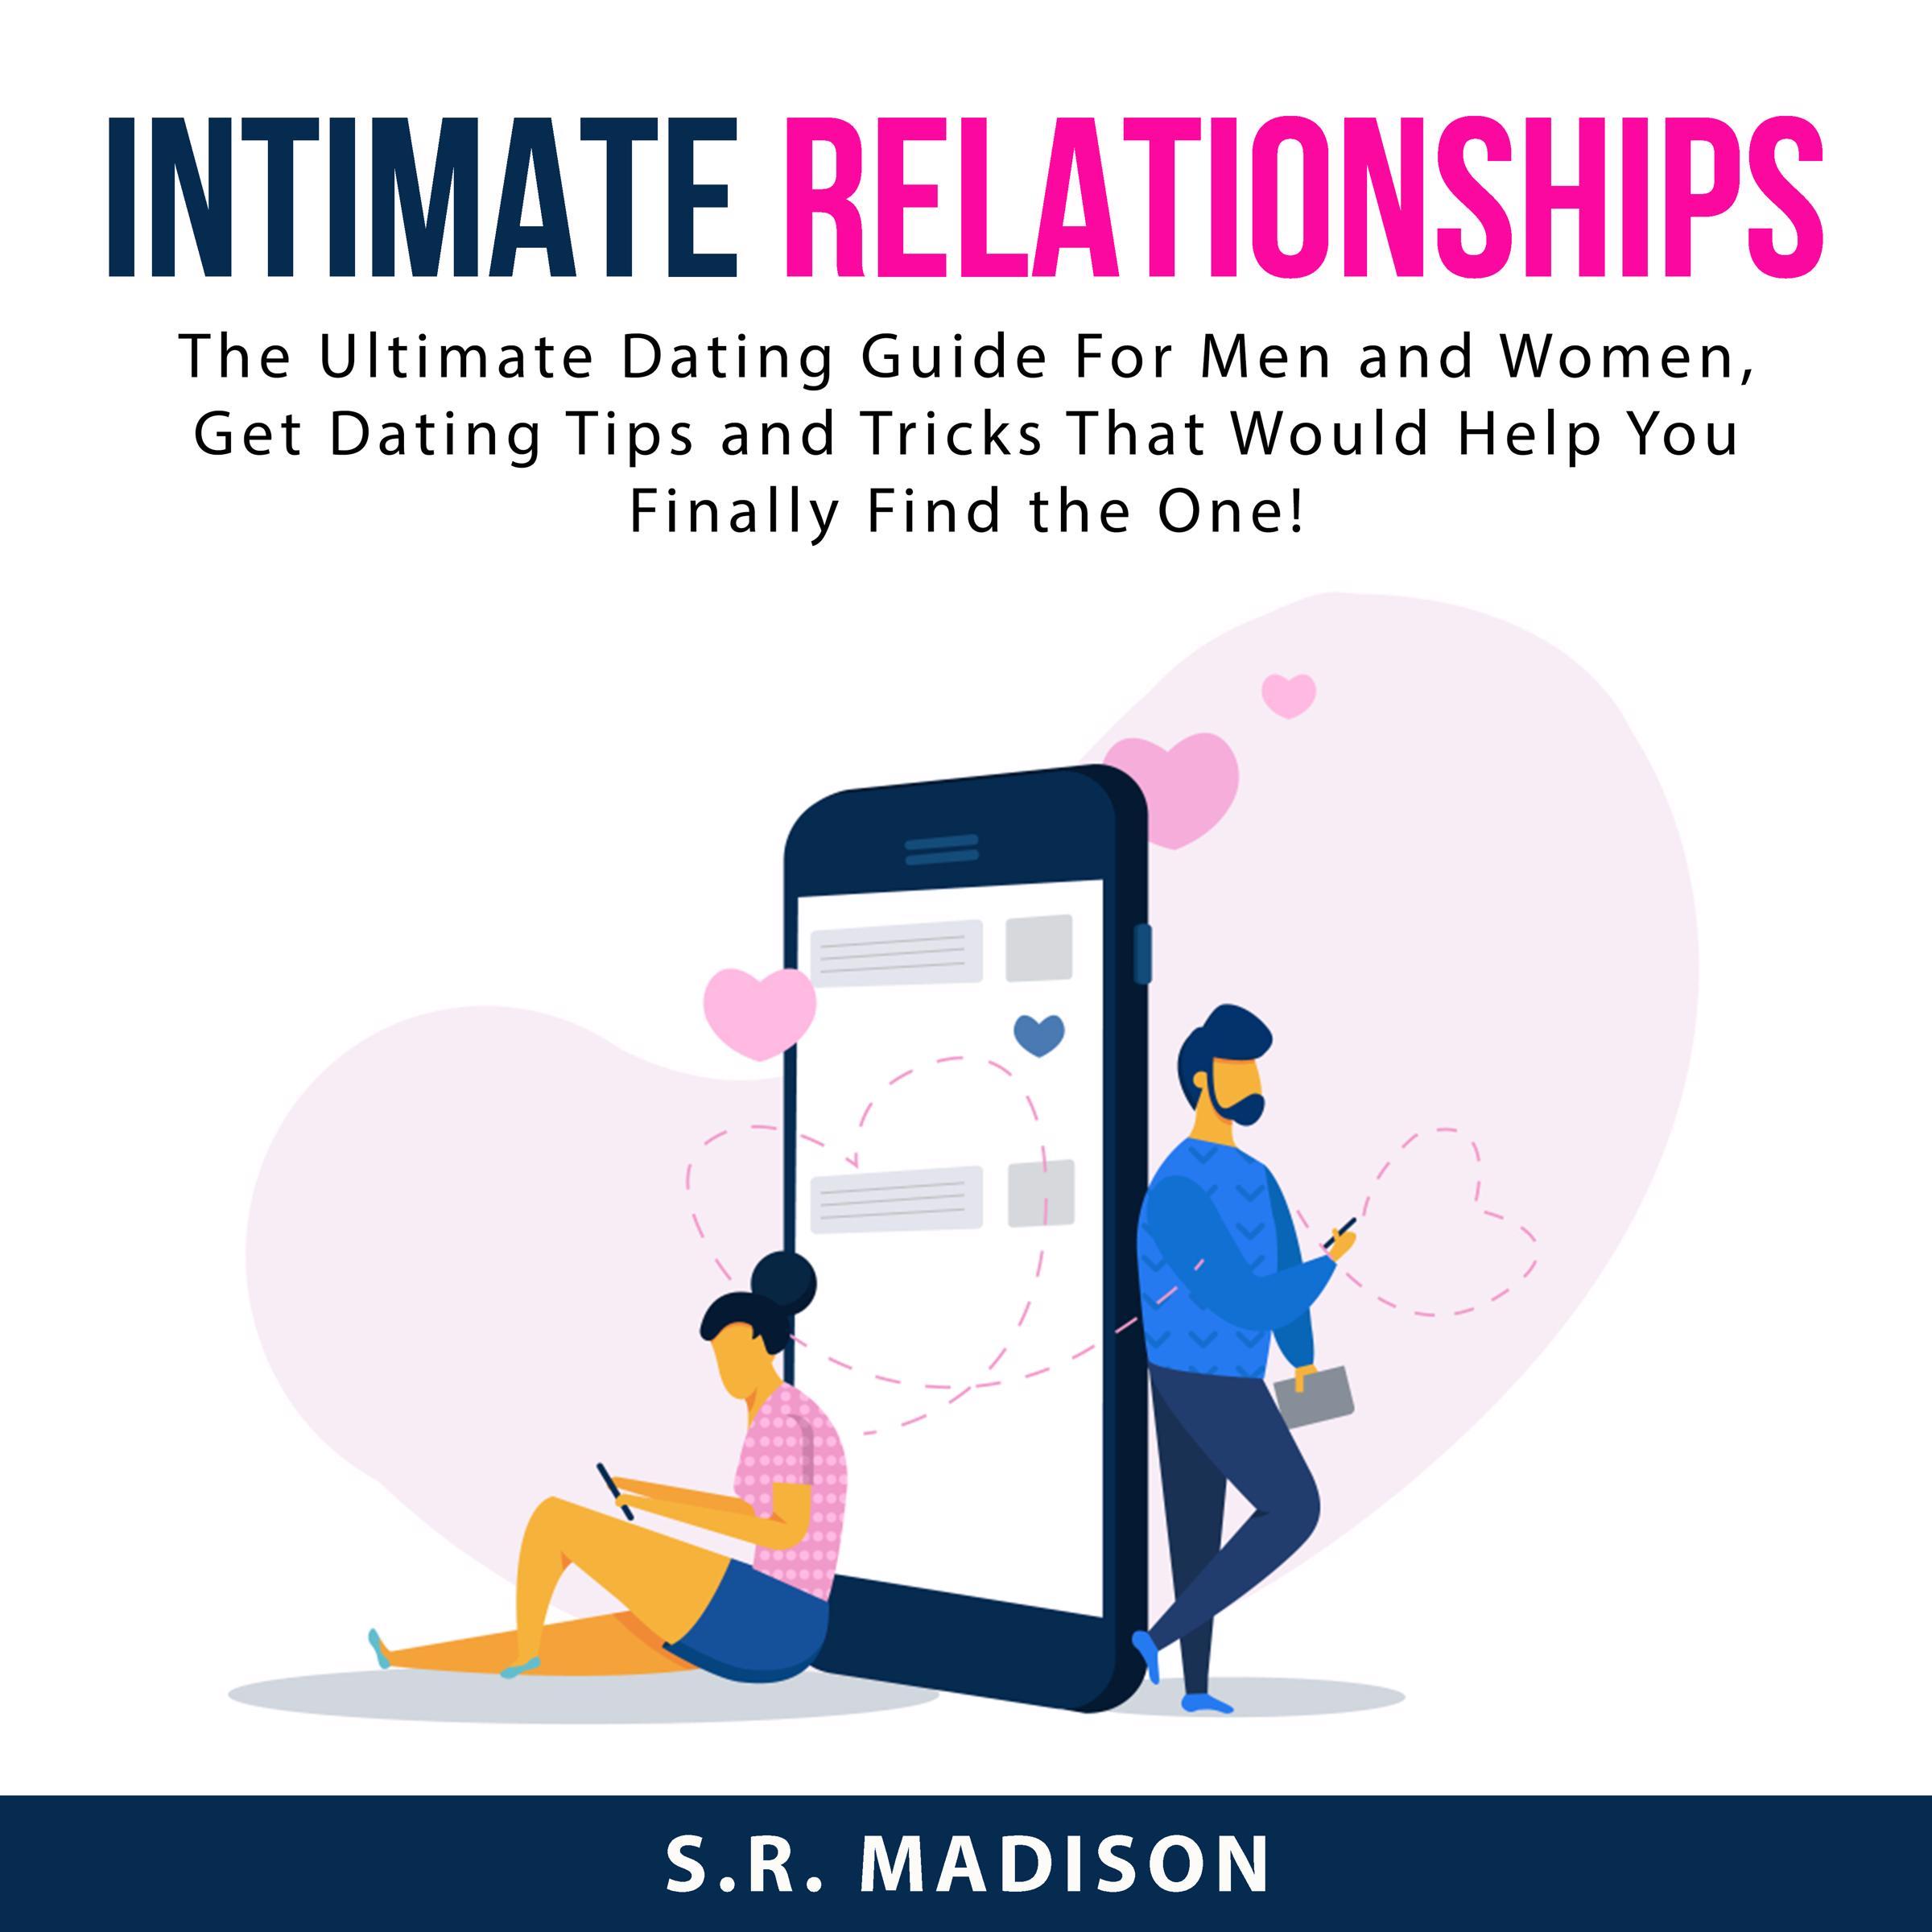 Intimate Relationships: The Ultimate Dating Guide For Men and Women, Get Dating Tips and Tricks That Would Help You Finally Find the One!